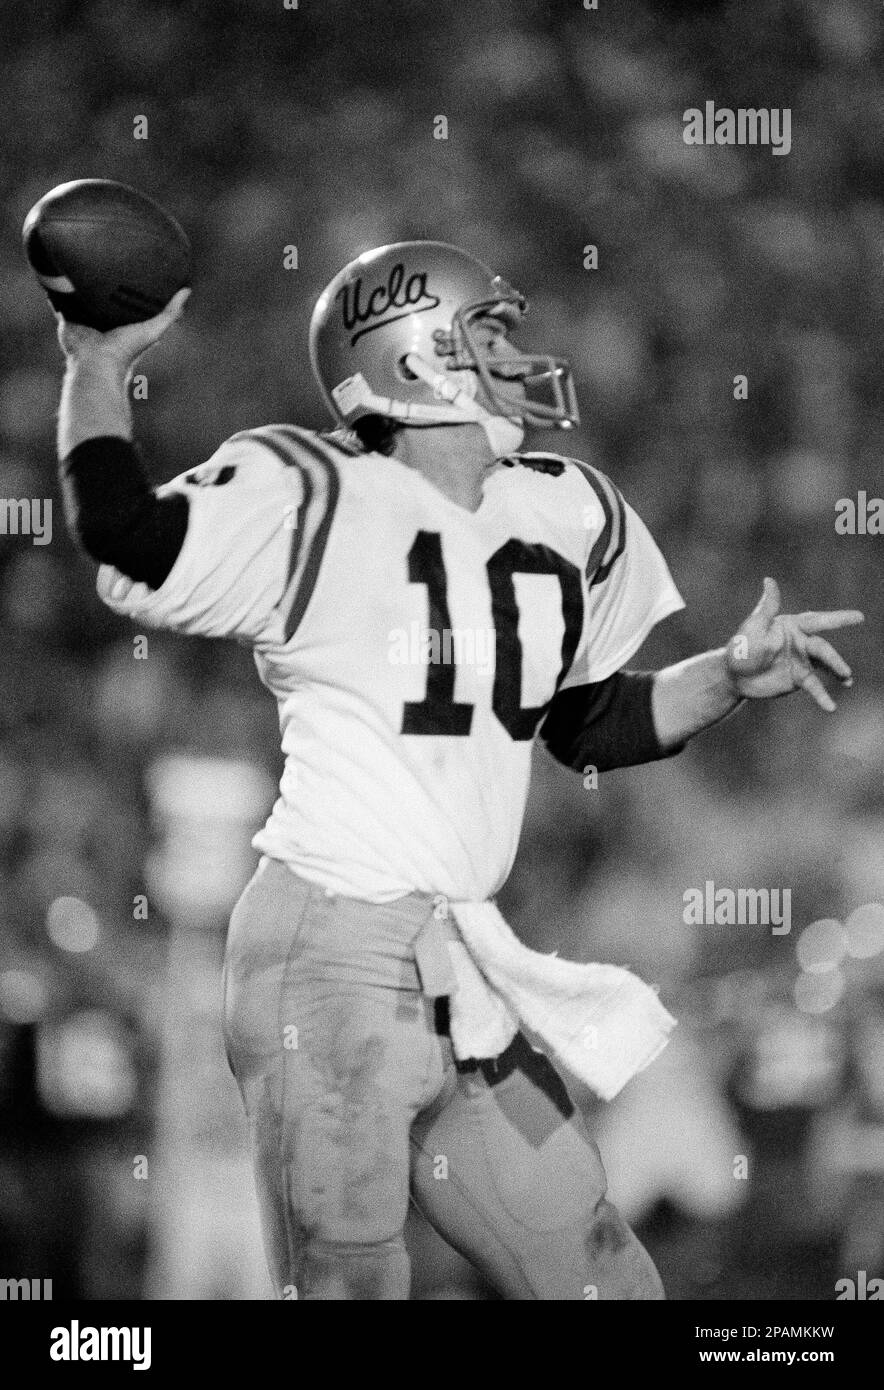 https://c8.alamy.com/comp/2PAMKKW/fil-e-ucla-quarterback-rick-neuheisel-rears-back-to-pass-in-this-jan-2-1984-file-photo-during-second-half-action-against-illinois-in-the-rose-bowl-football-game-at-pasadena-calif-neuheisel-who-quarterbacked-the-ucla-to-victory-in-the-1984-rose-bowl-and-later-served-as-an-assistant-under-terry-donahue-was-hired-as-head-coach-on-saturday-saturday-dec-29-2007-as-his-alma-maters-16th-coach-neuheisel-spent-the-last-three-seasons-as-an-assistant-coach-for-the-nfls-baltimore-ravens-ap-photo-2PAMKKW.jpg